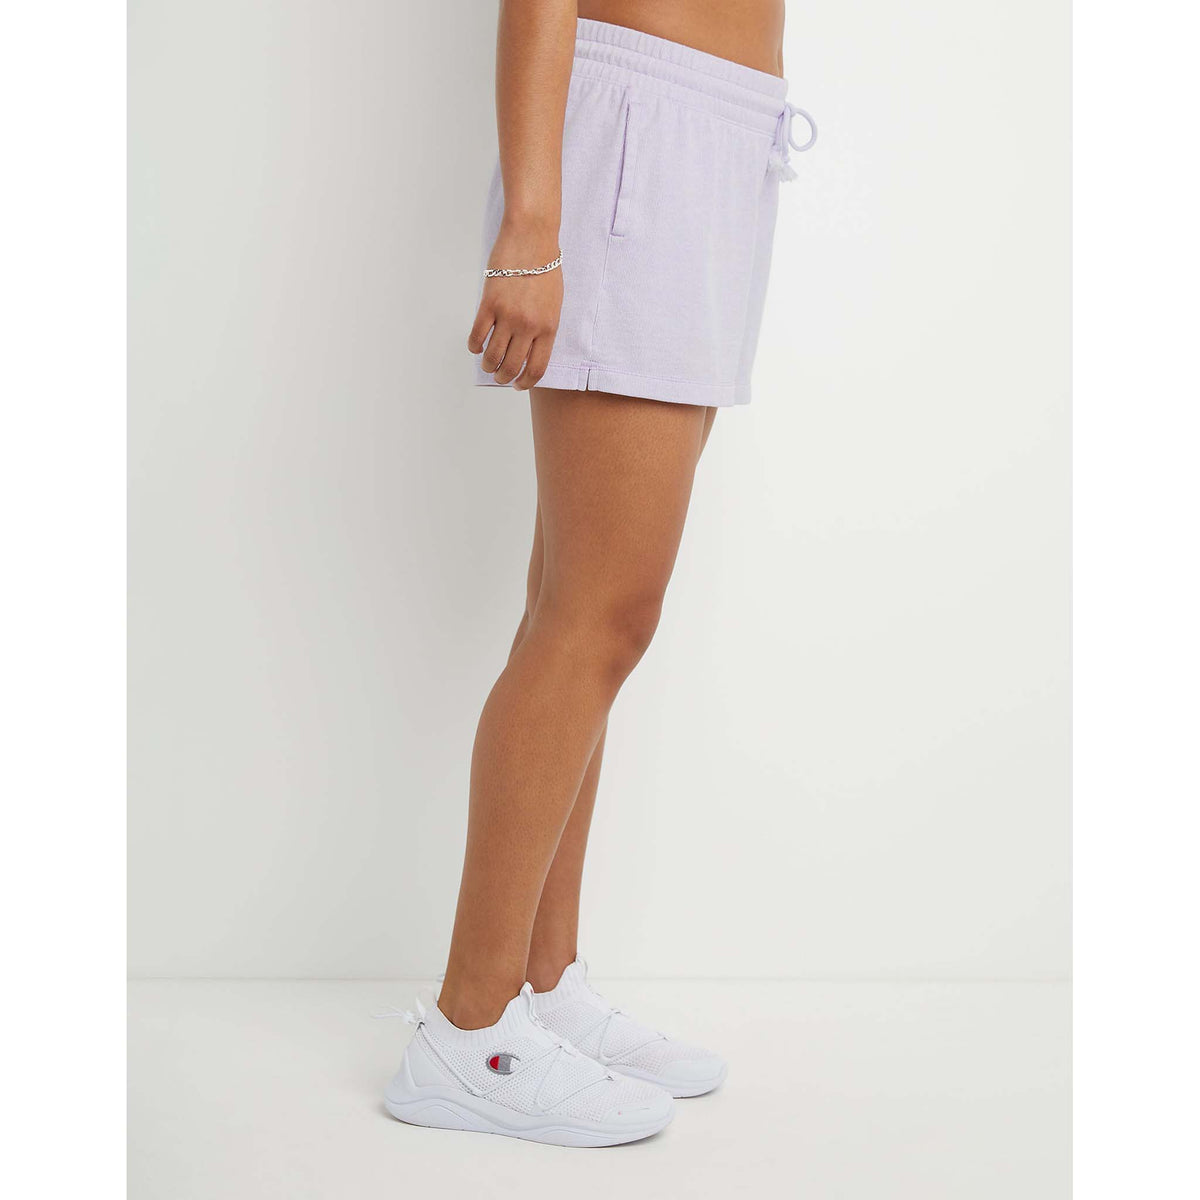 Champion Middleweight 3-inch short de sport pour femme lilas chiné lateral